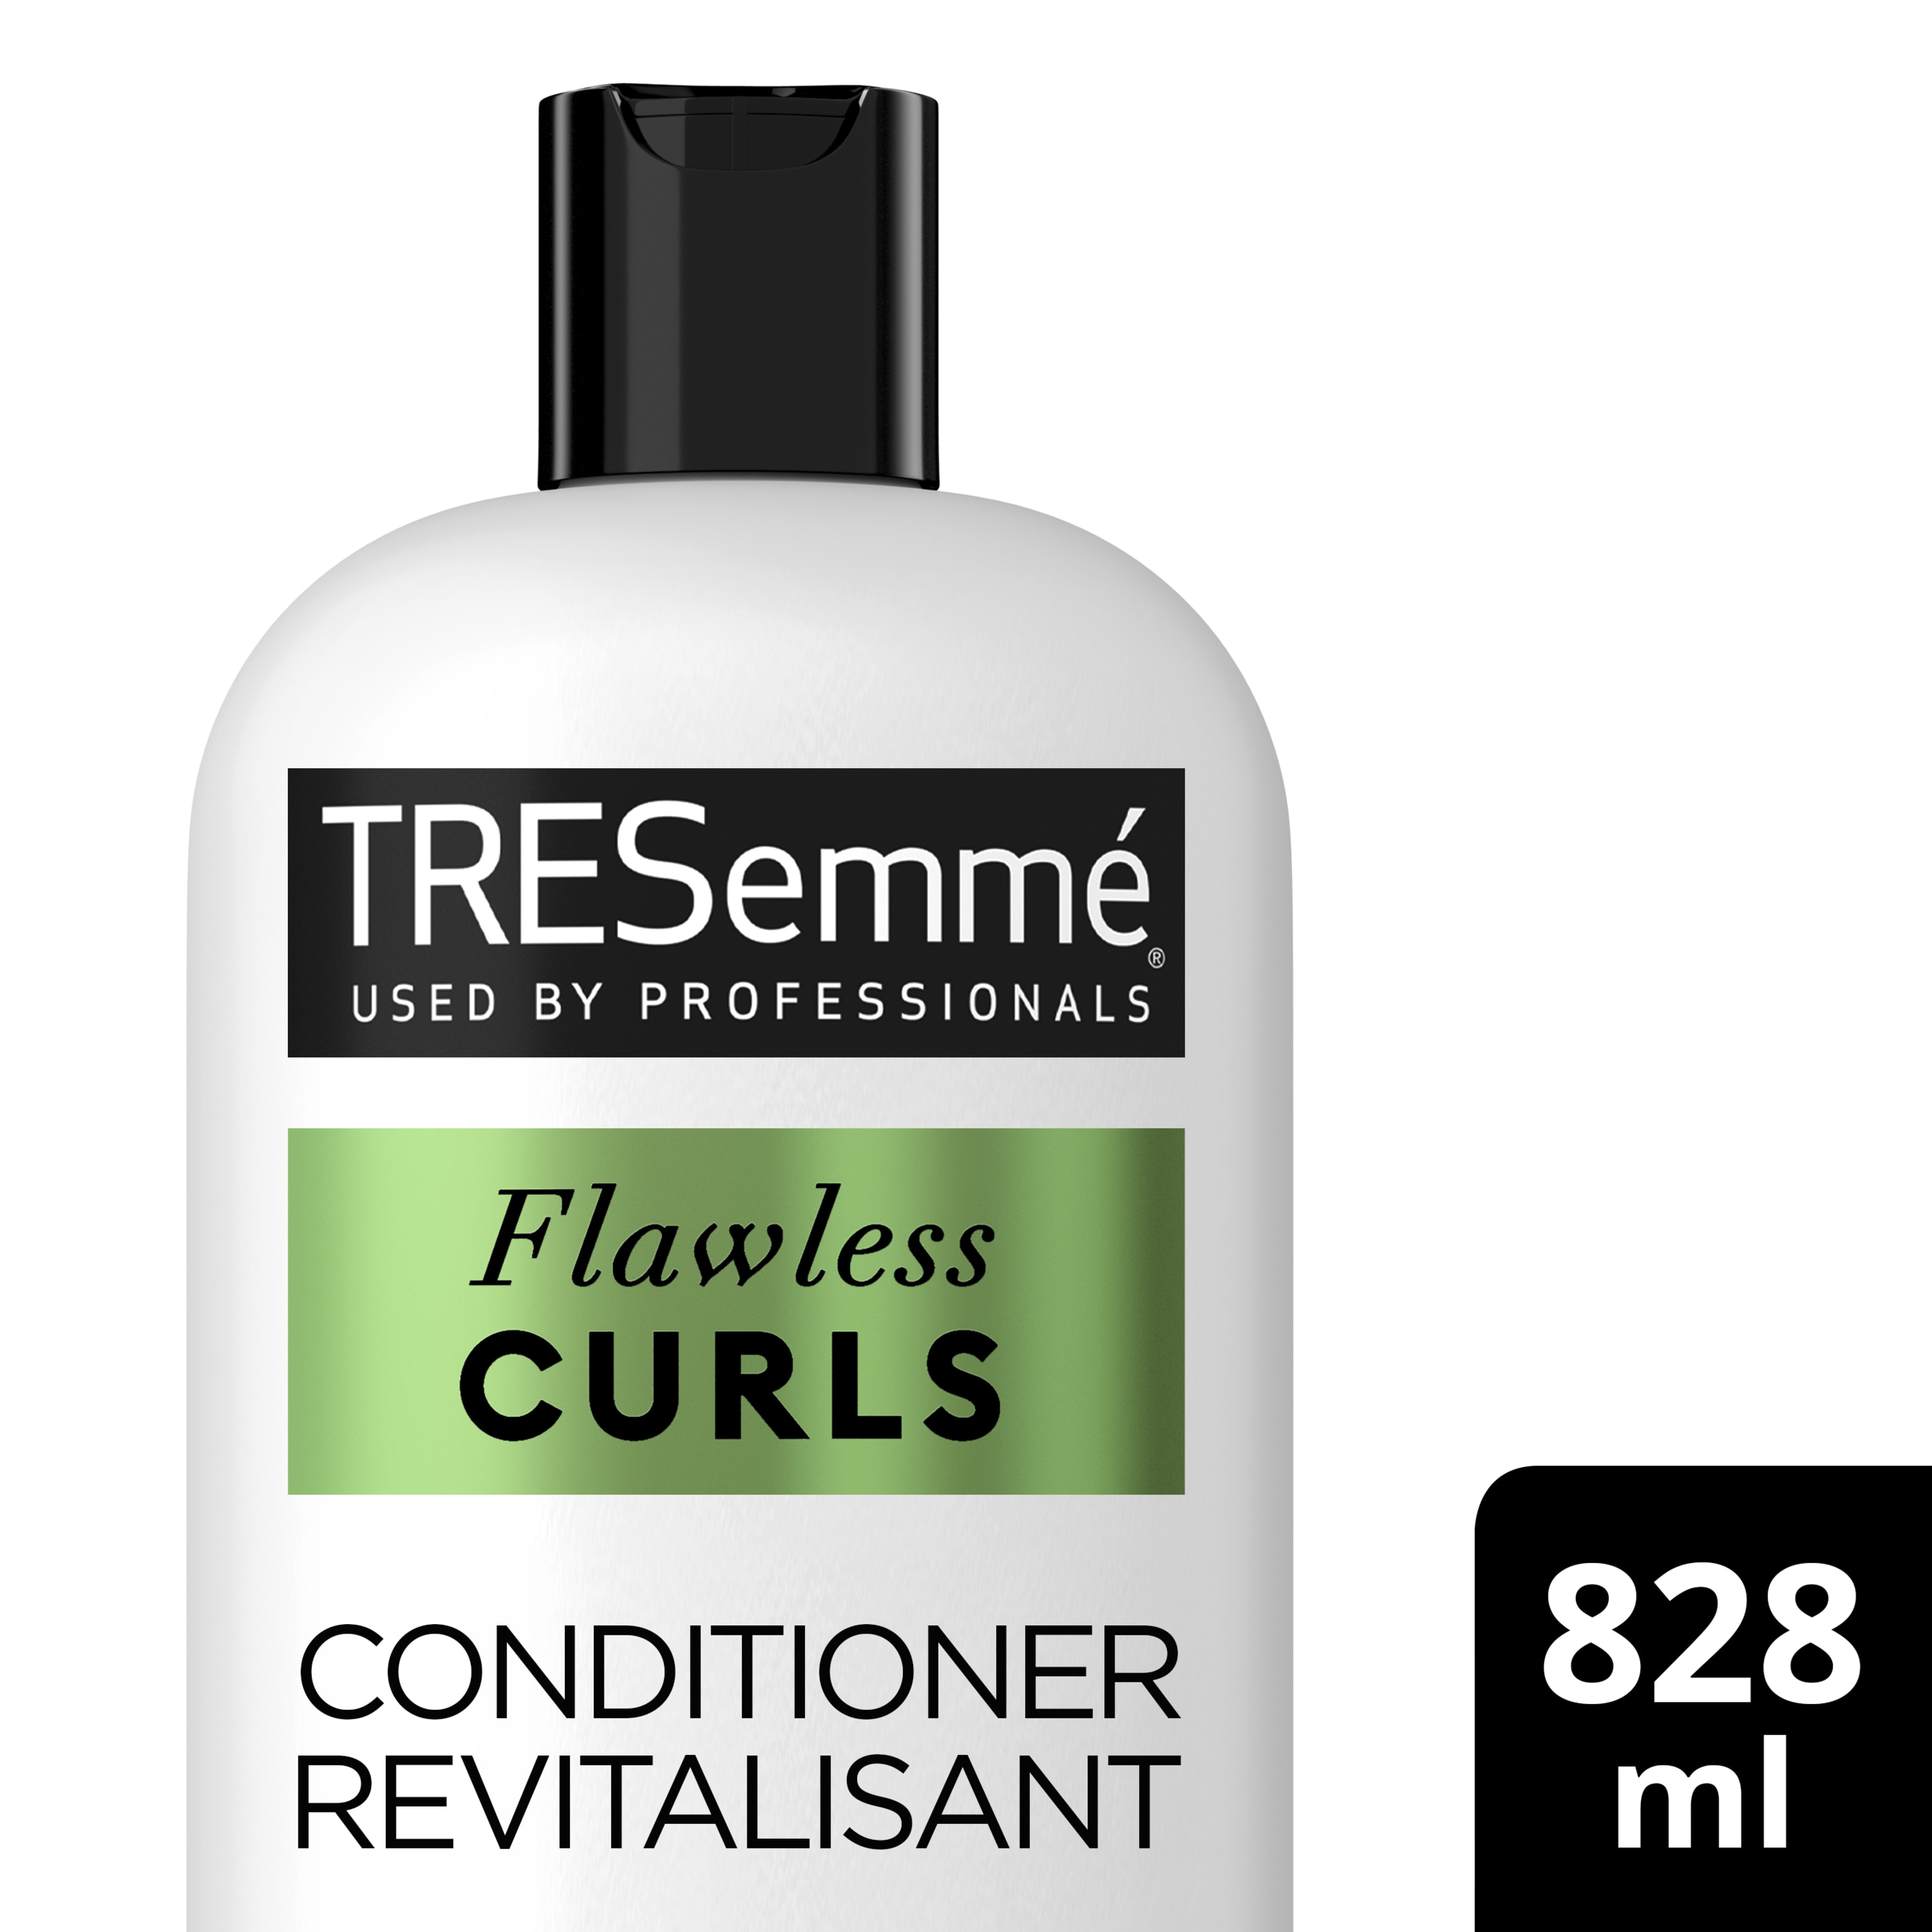 Flawless Curls Conditioner for Curly Hair